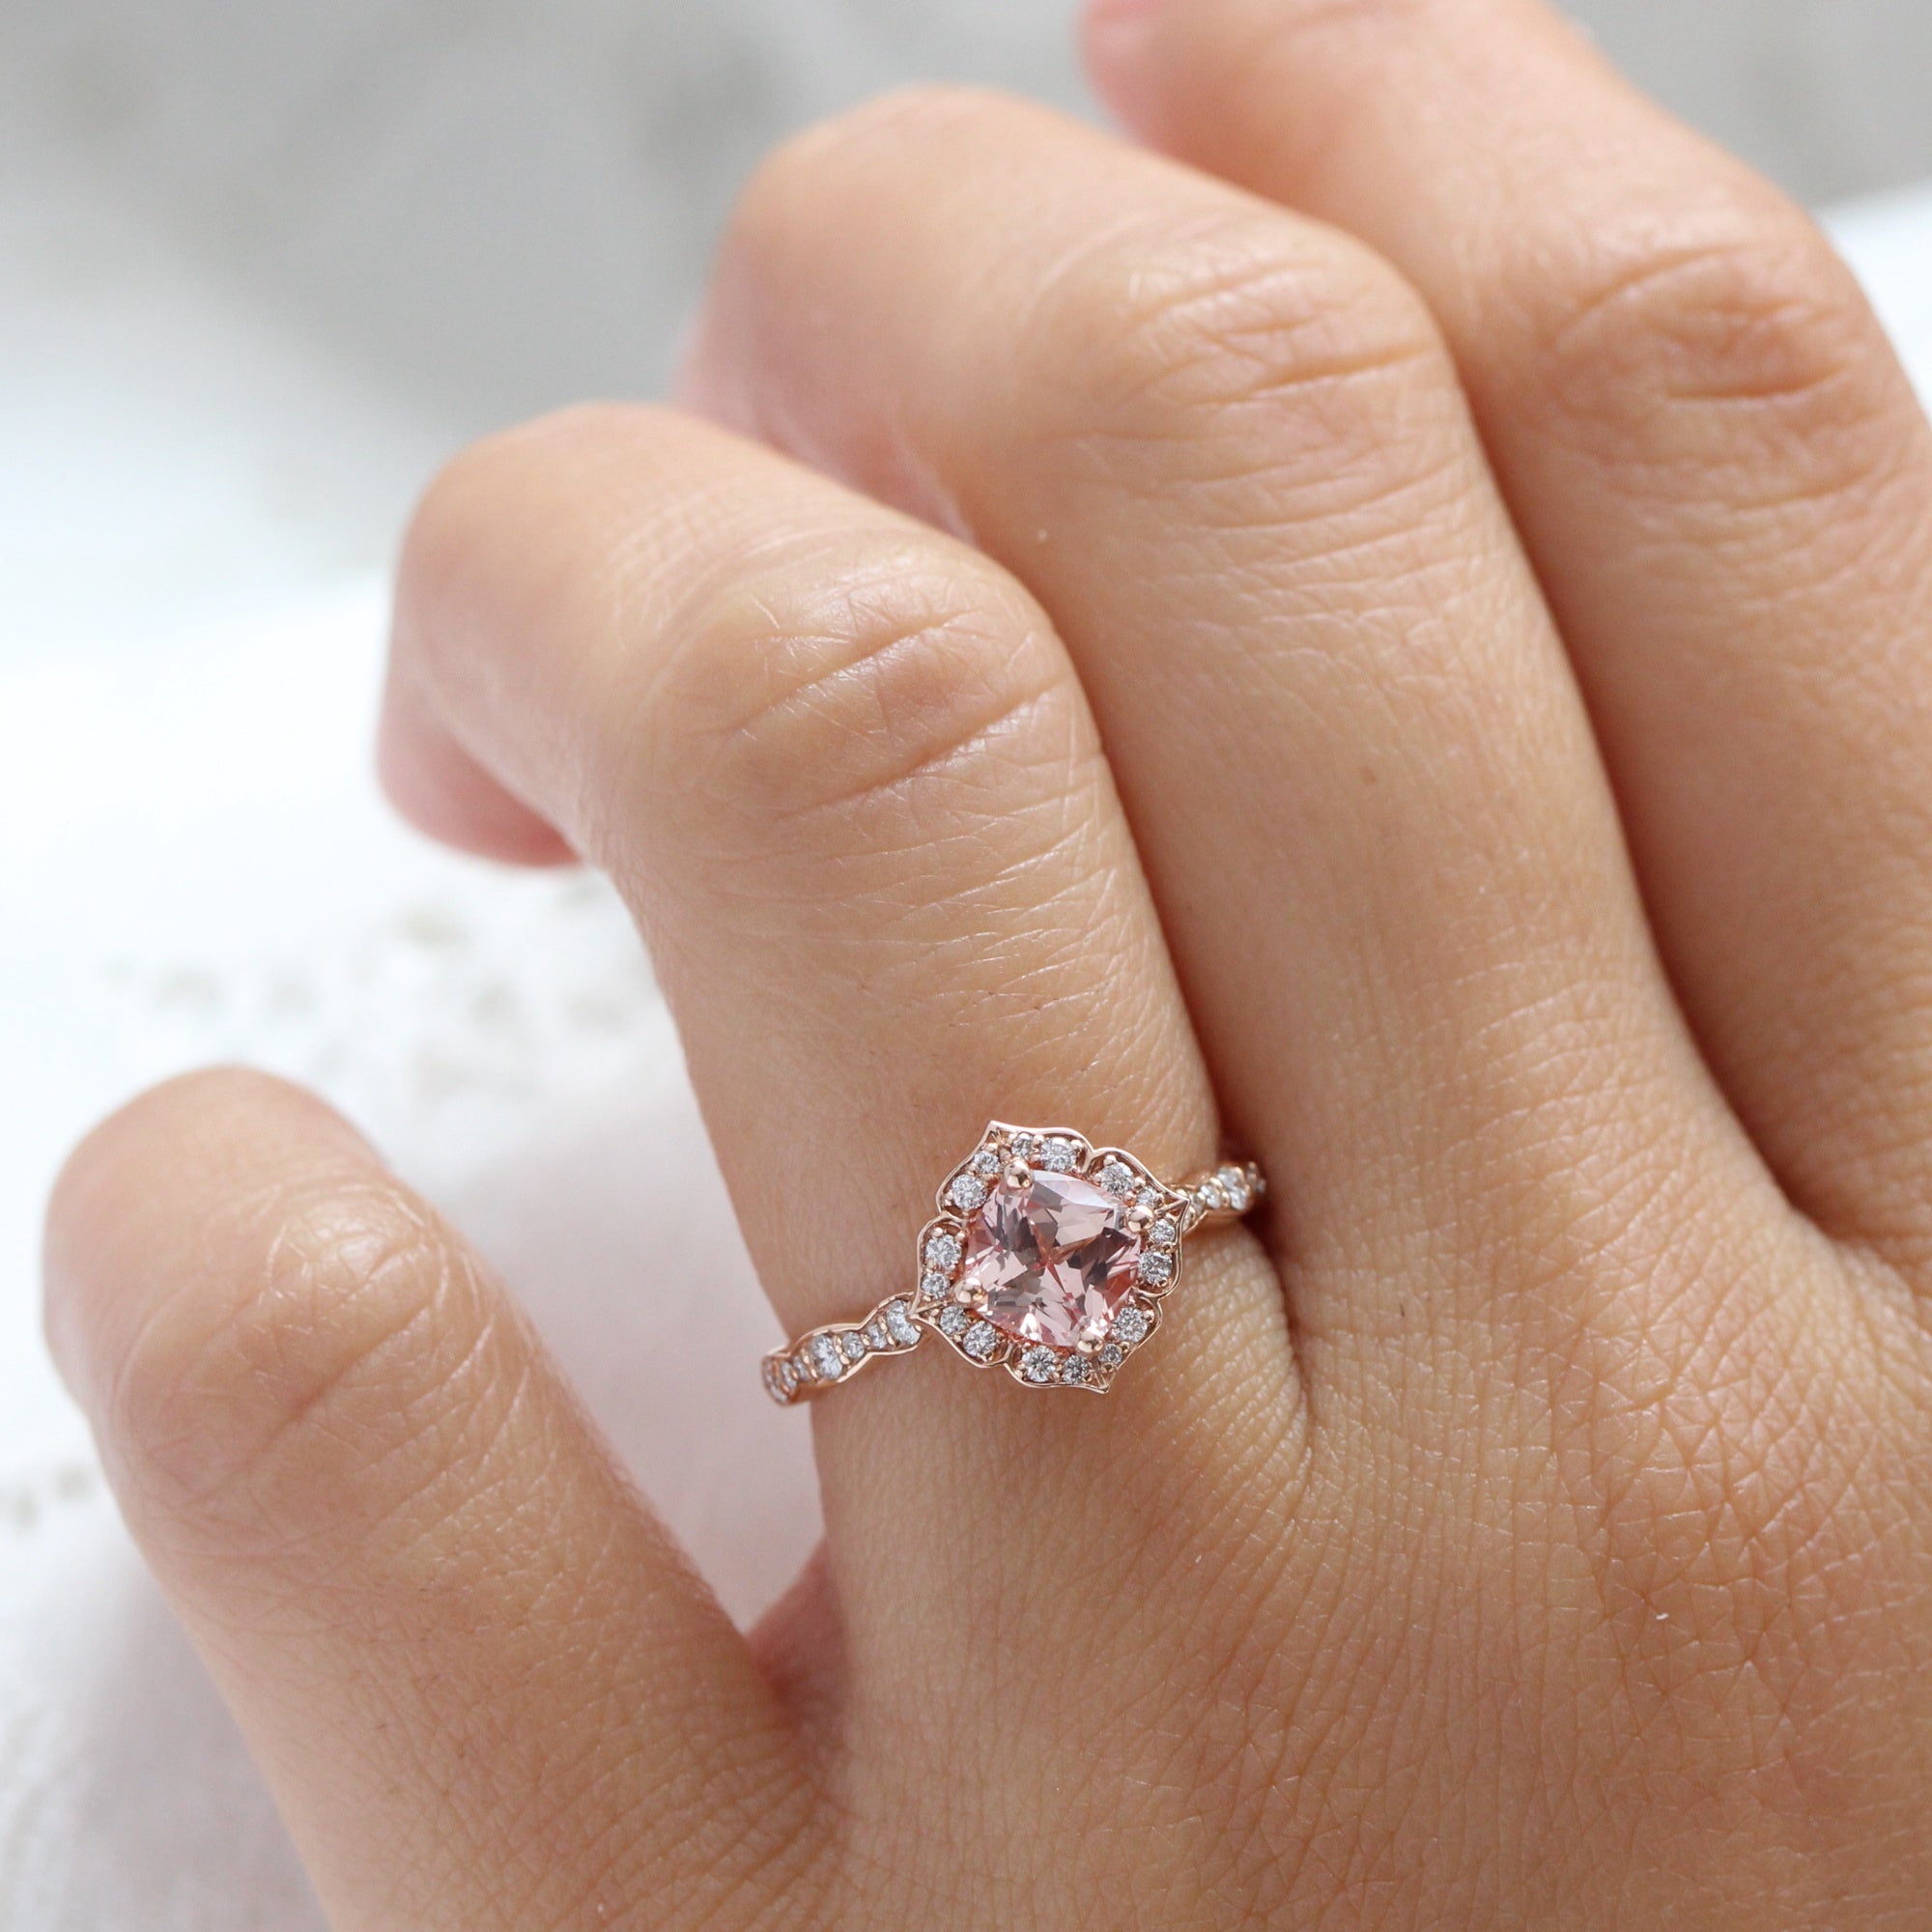 Mini Vintage Floral Peach Sapphire Ring in 14k Rose Gold Scalloped Diamond Band, Size 6